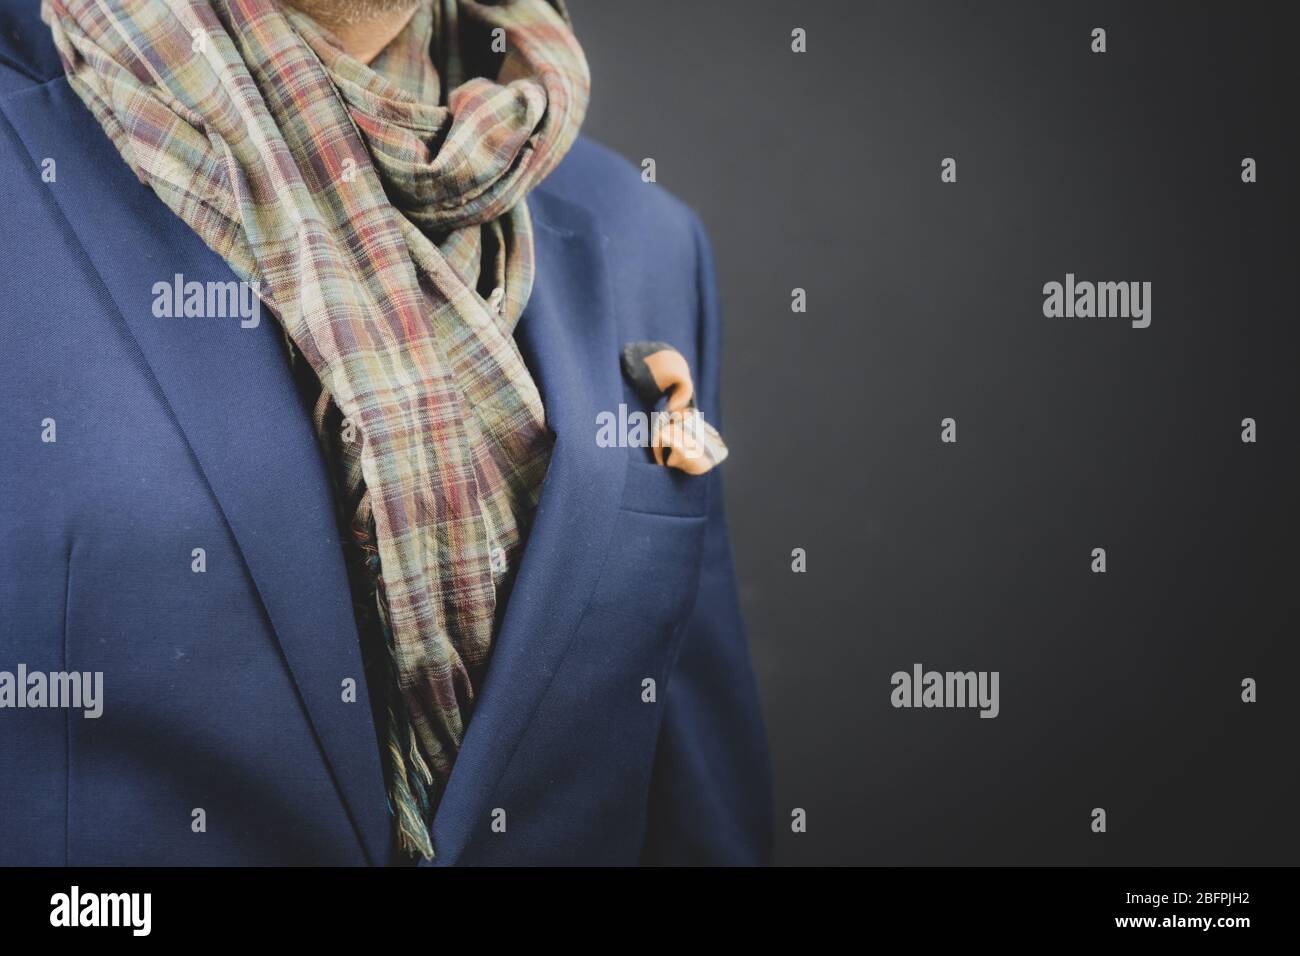 Stylish man smartly dressed in a scarf and suit. Stock Photo